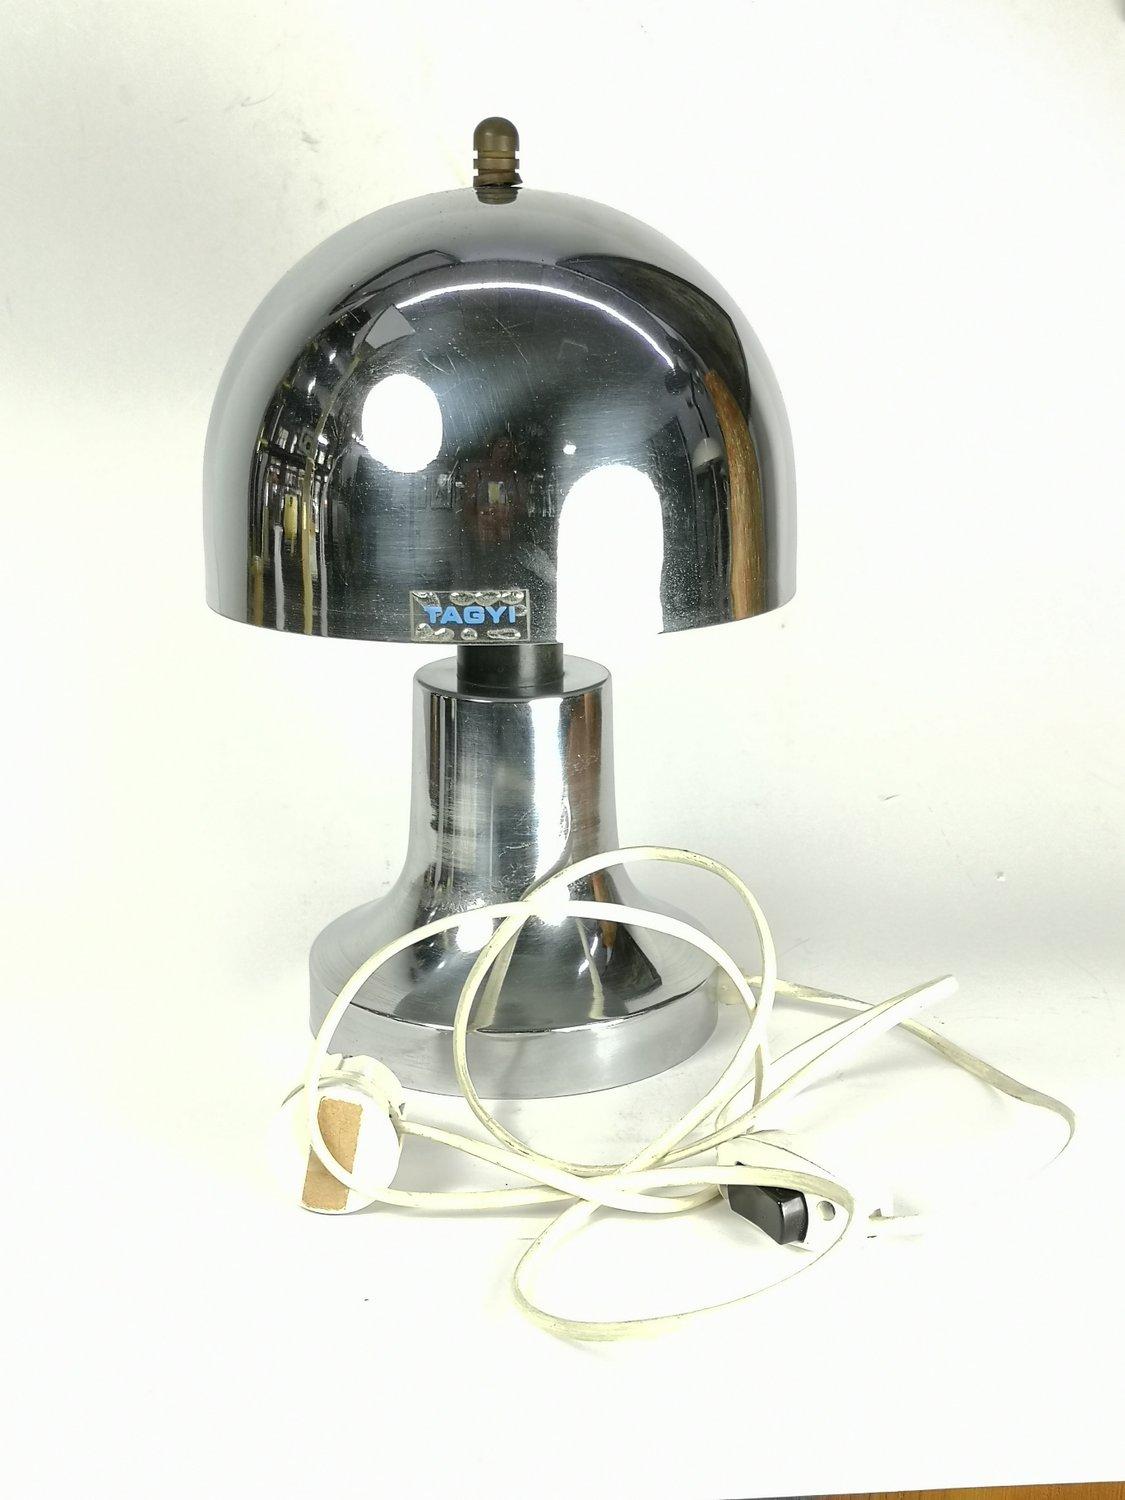 Extremely rare design lamp from the 1970's. These lamps were produced in very limited numbers, not in a factory setting. Zoltan Tagyi, award winning metal artist designed and probably also manufactured this striking light source. The attached